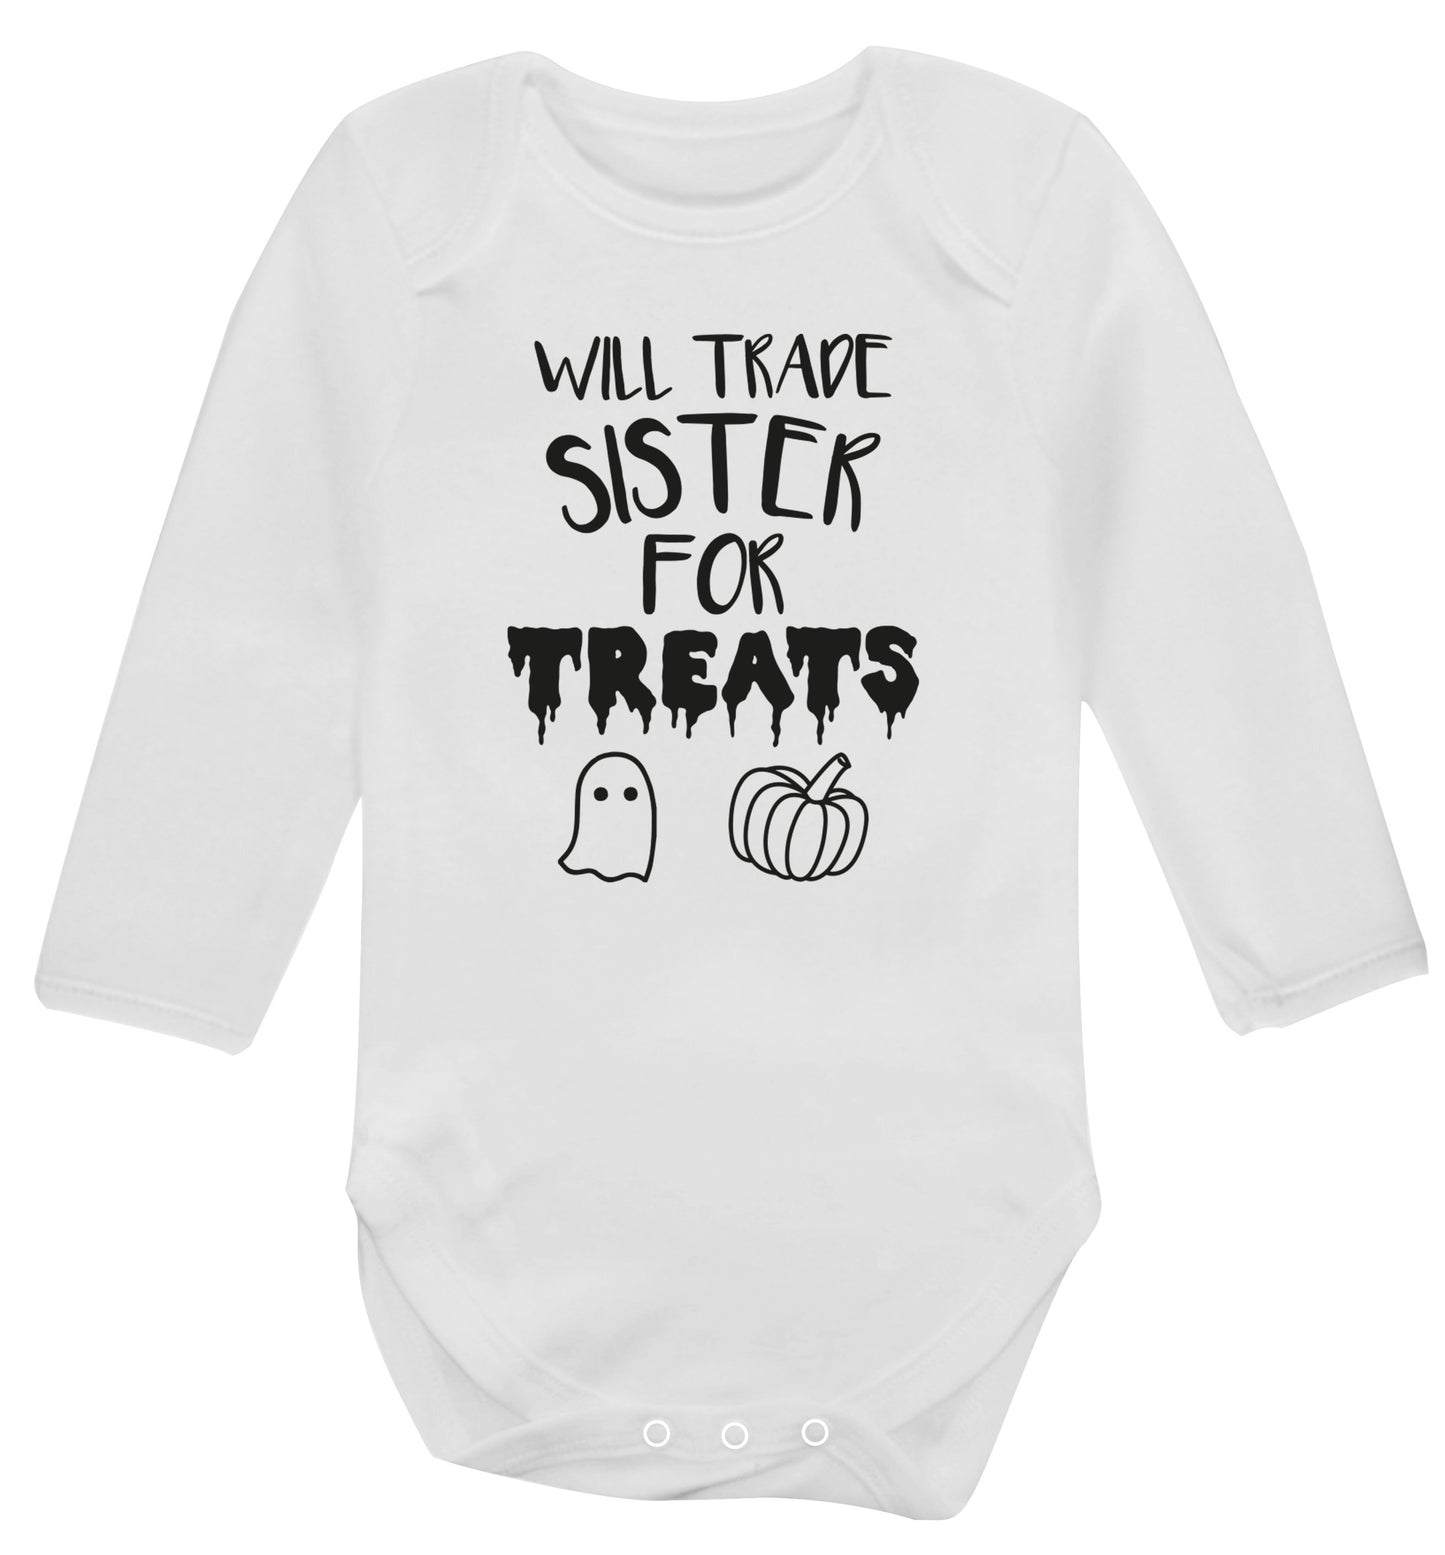 Will trade sister for treats Baby Vest long sleeved white 6-12 months